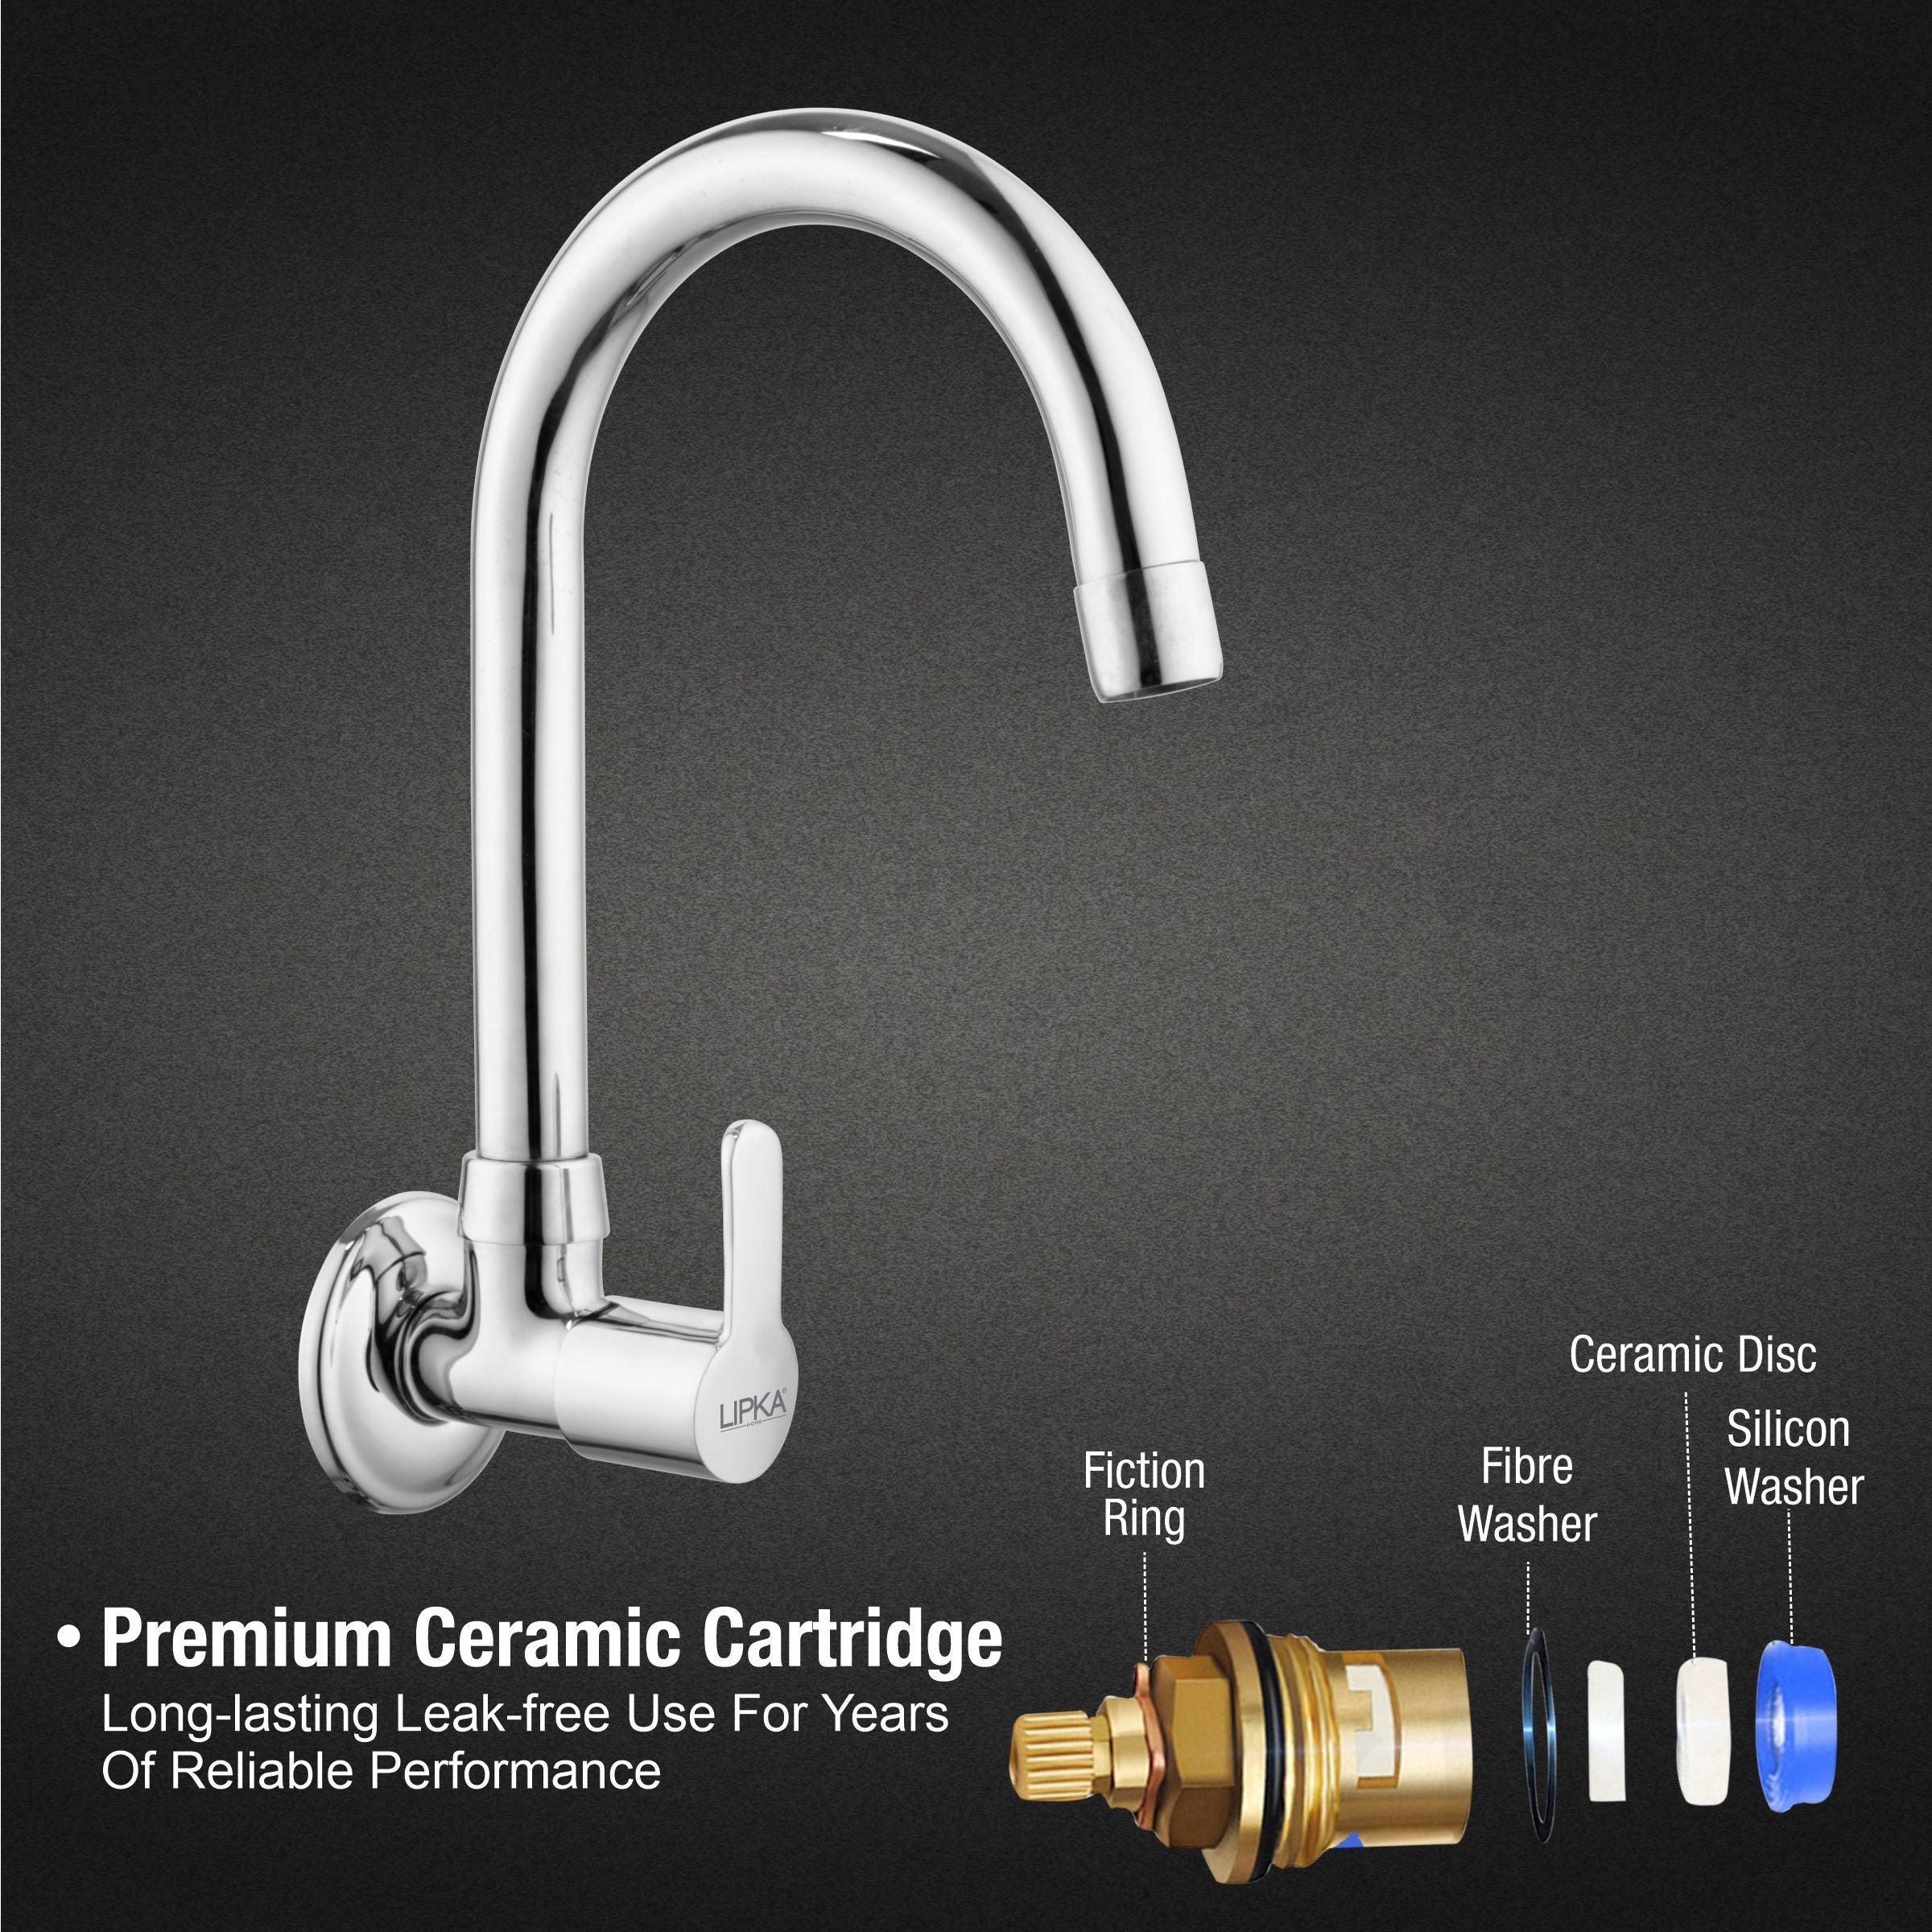 Frenk Sink Tap Brass Faucet with Round Swivel Spout (15 Inches) - LIPKA - Lipka Home